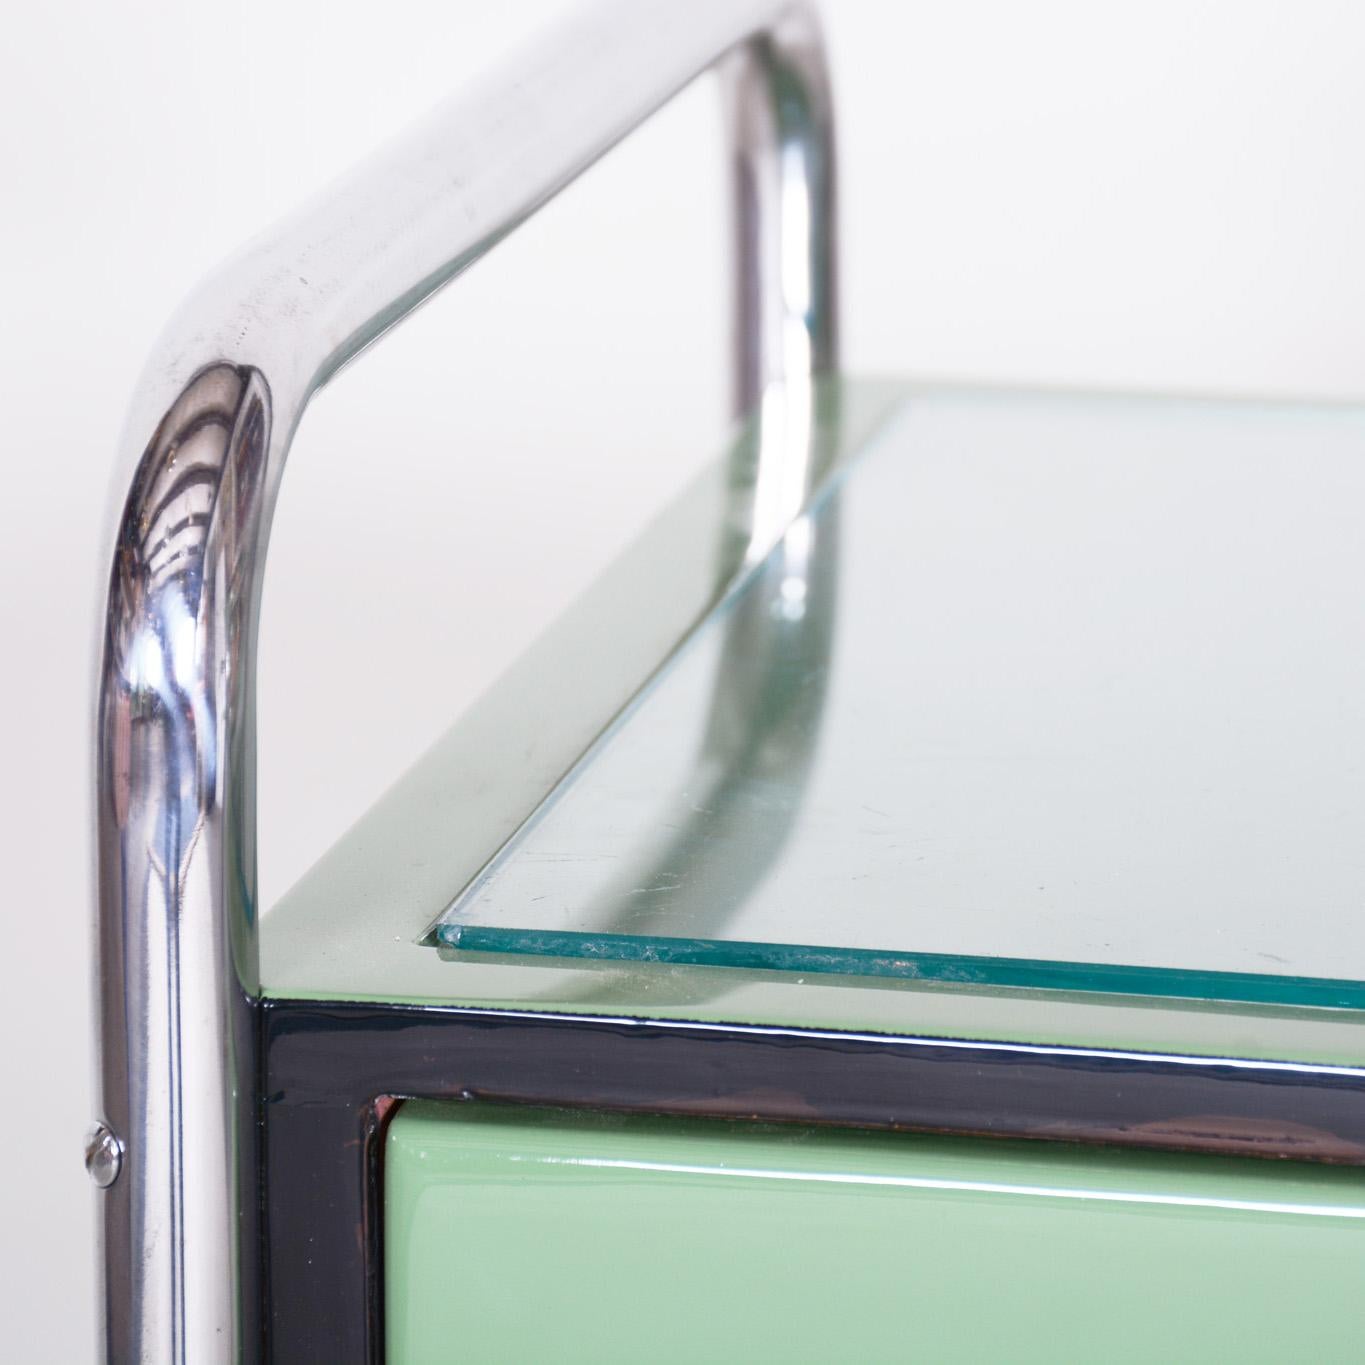 Restored Bauhaus Pair of Bed-Side Tables, Chrome-Plated Steel, Czech, 1930s For Sale 6